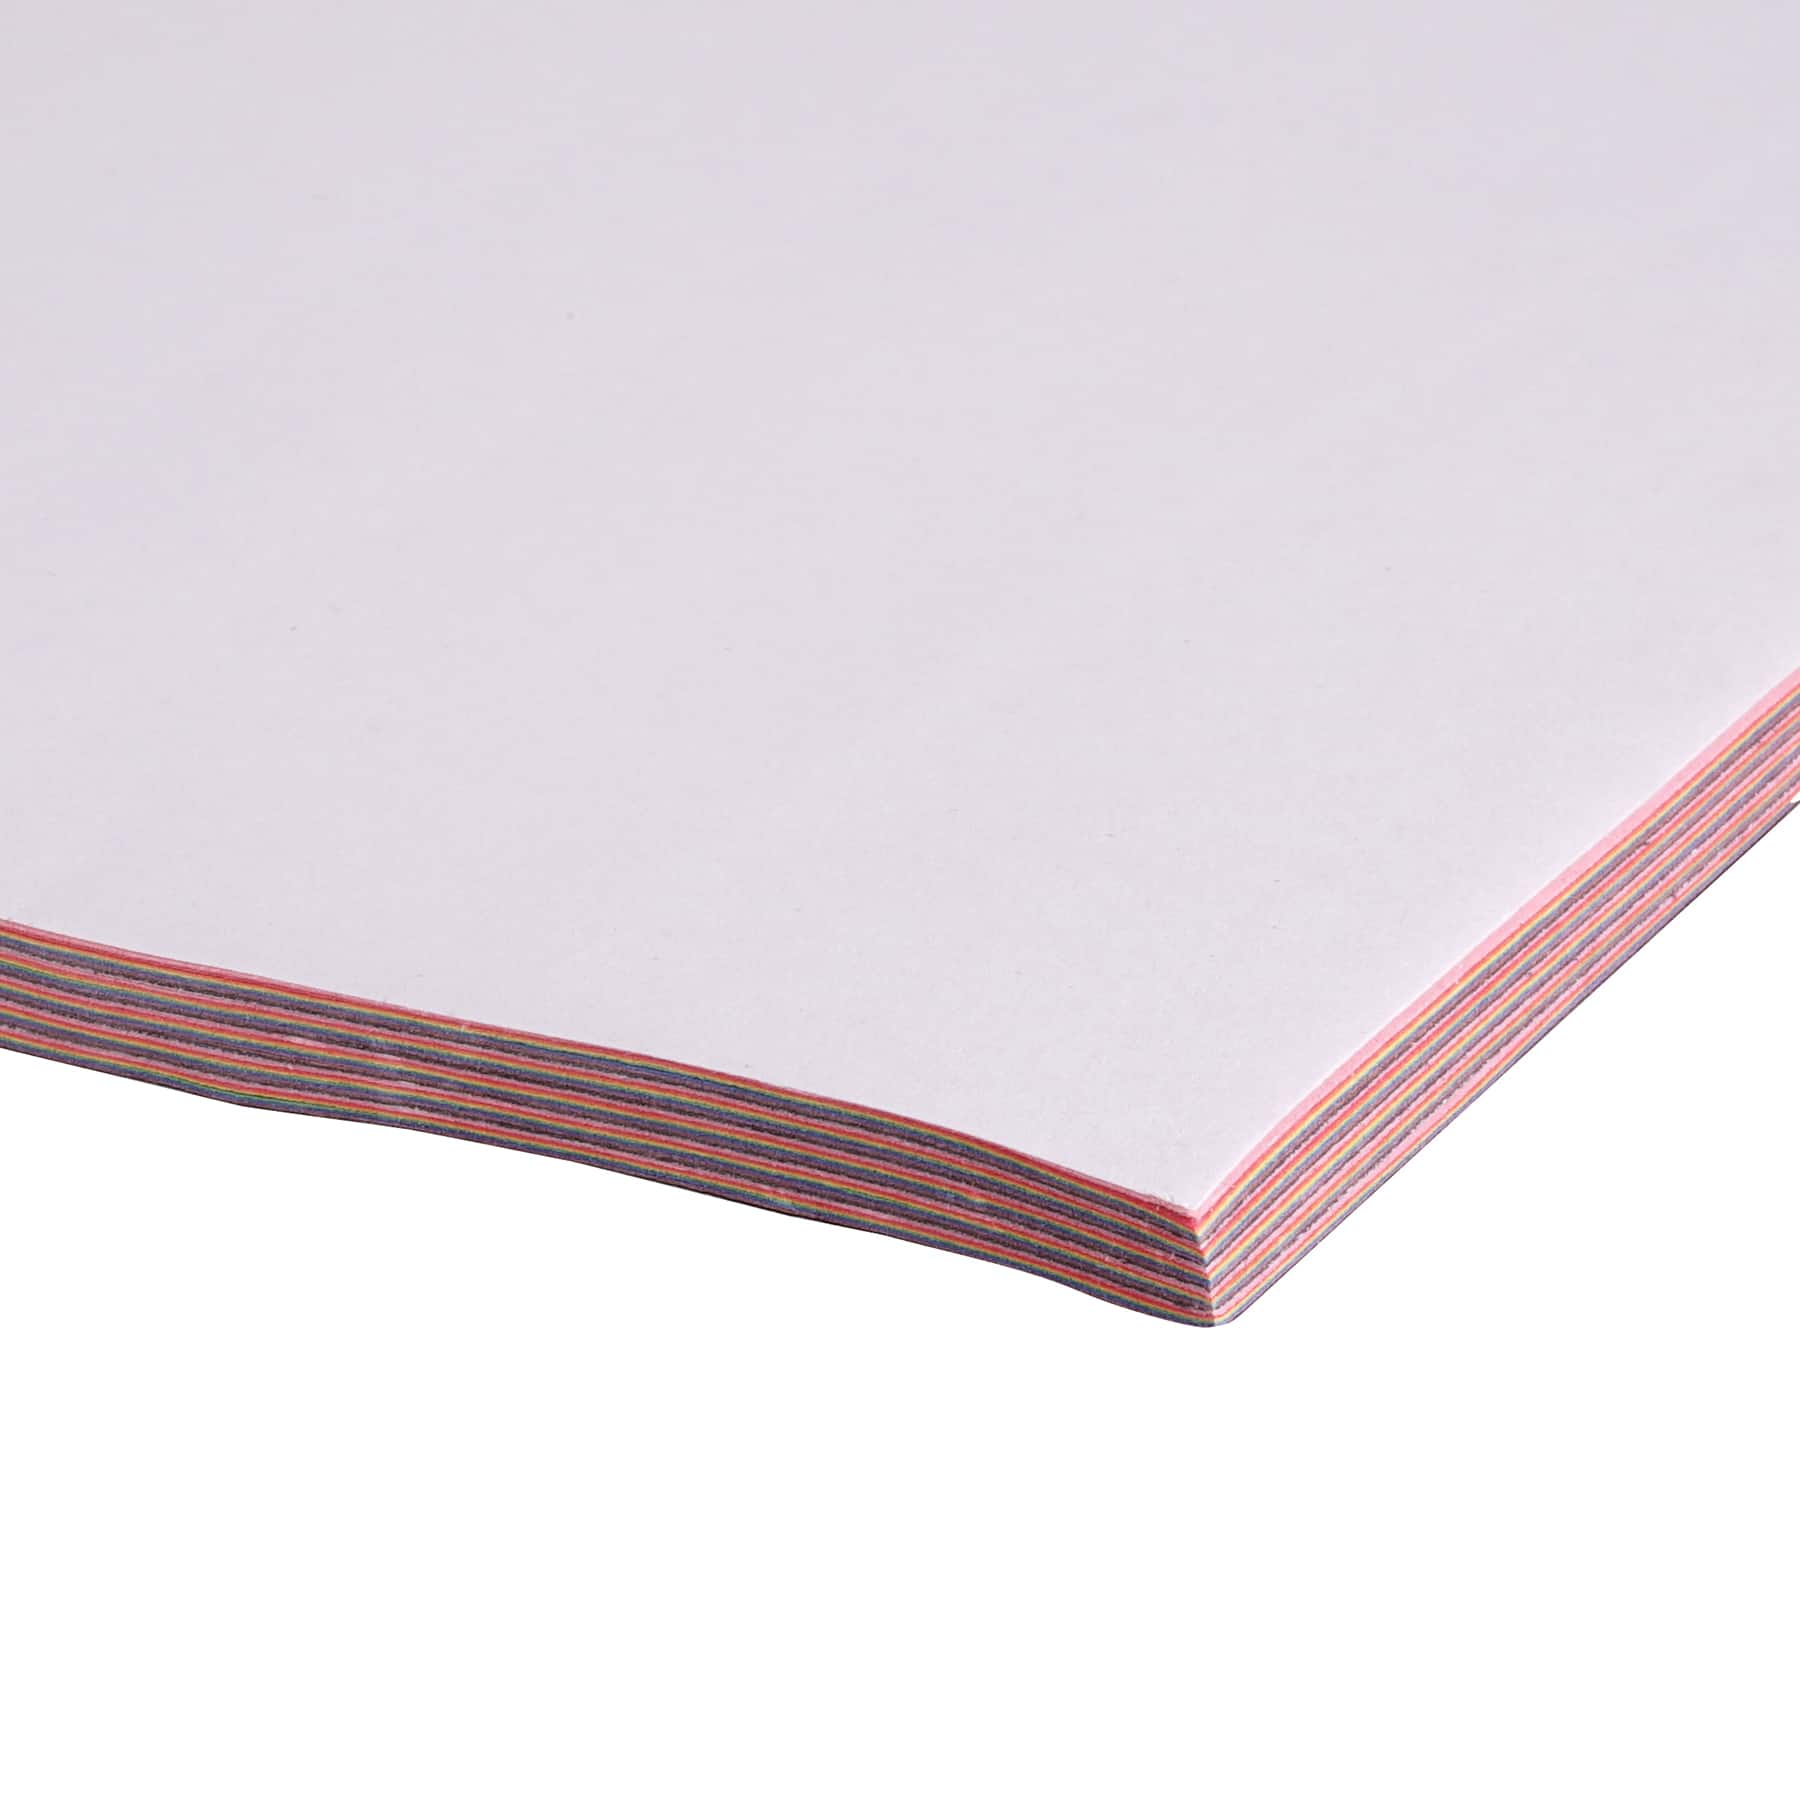 Michaels Bulk 12 Packs: 50 Ct. (600 Total) 9 inch x 12 inch Construction Paper by Creatology, Size: 9 x 12, White